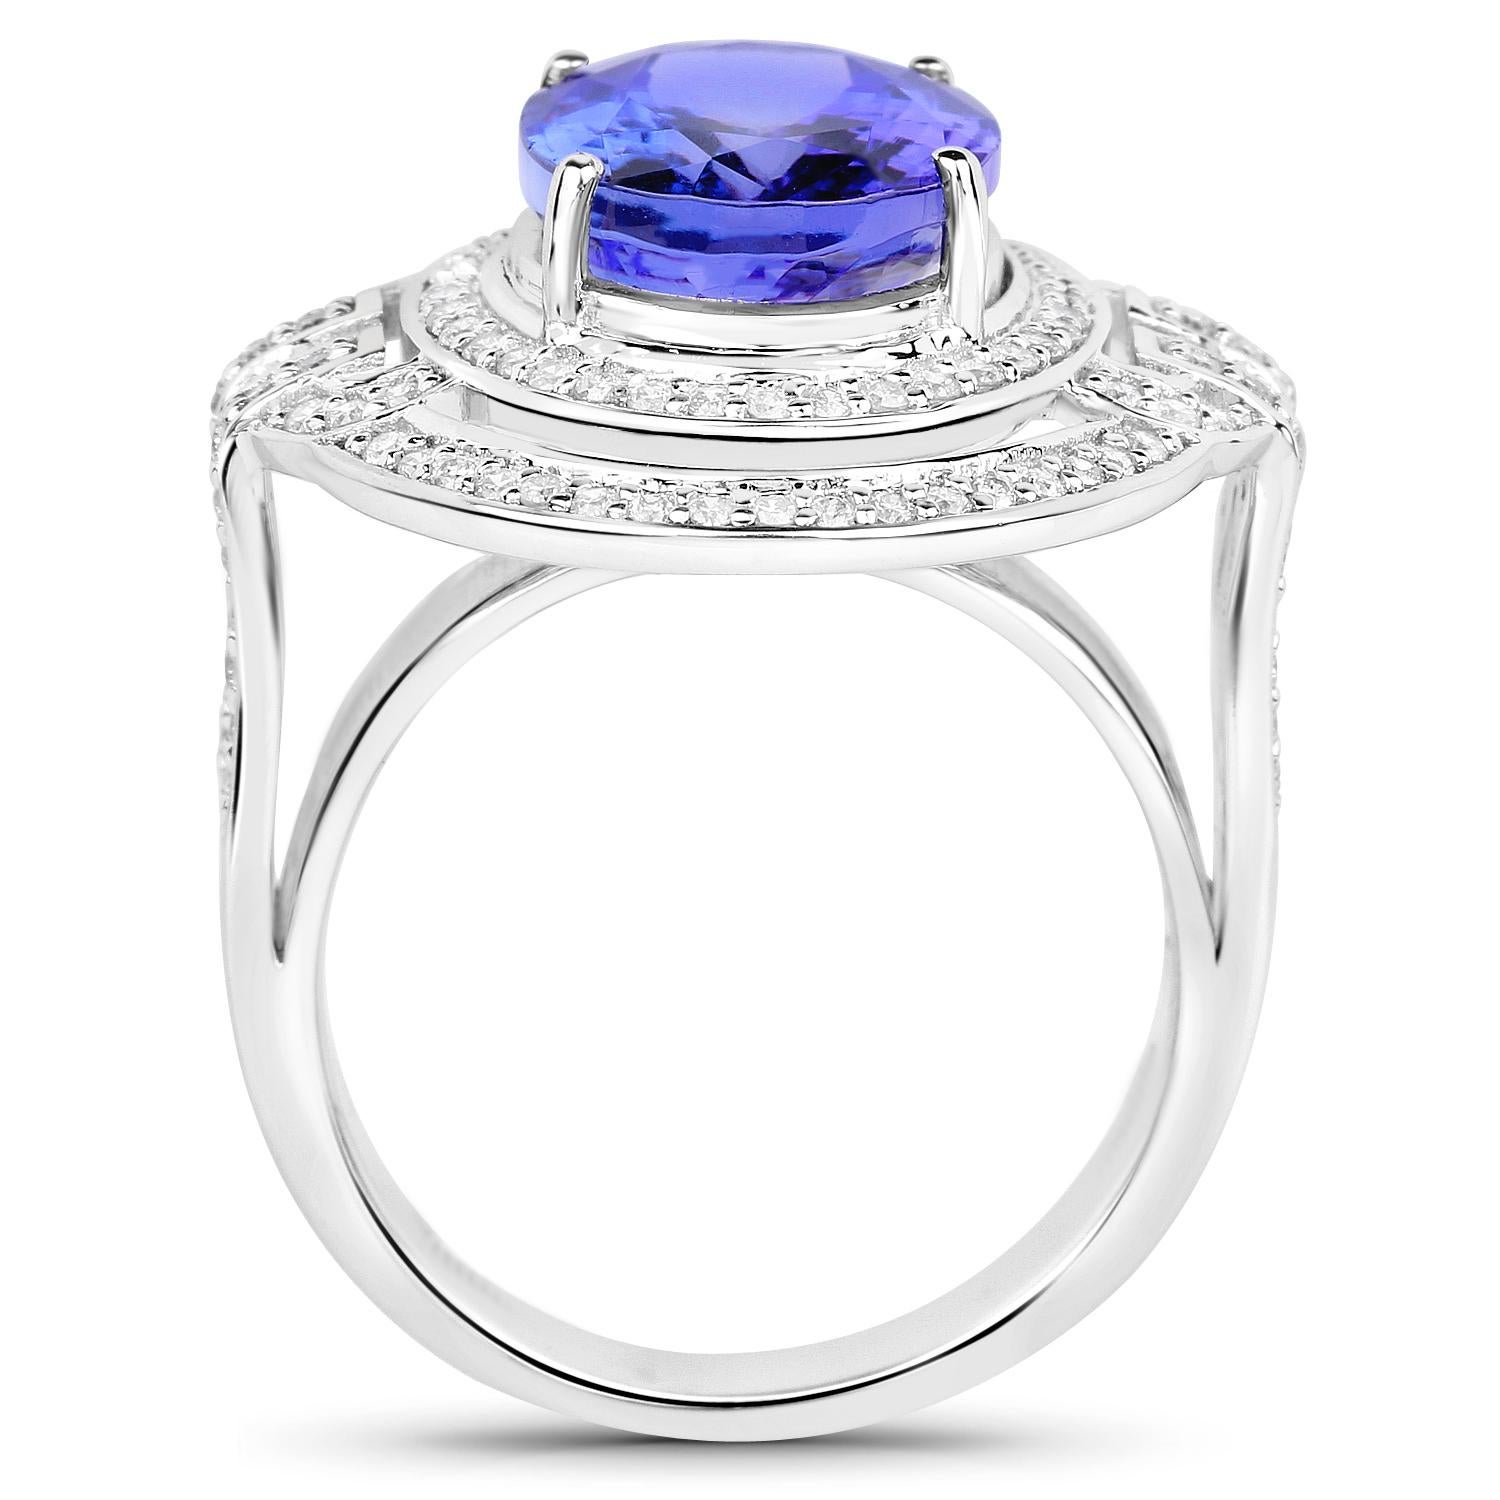 Tanzanite Ring With Diamonds 6.83 Carats 14K White Gold In Excellent Condition For Sale In Laguna Niguel, CA